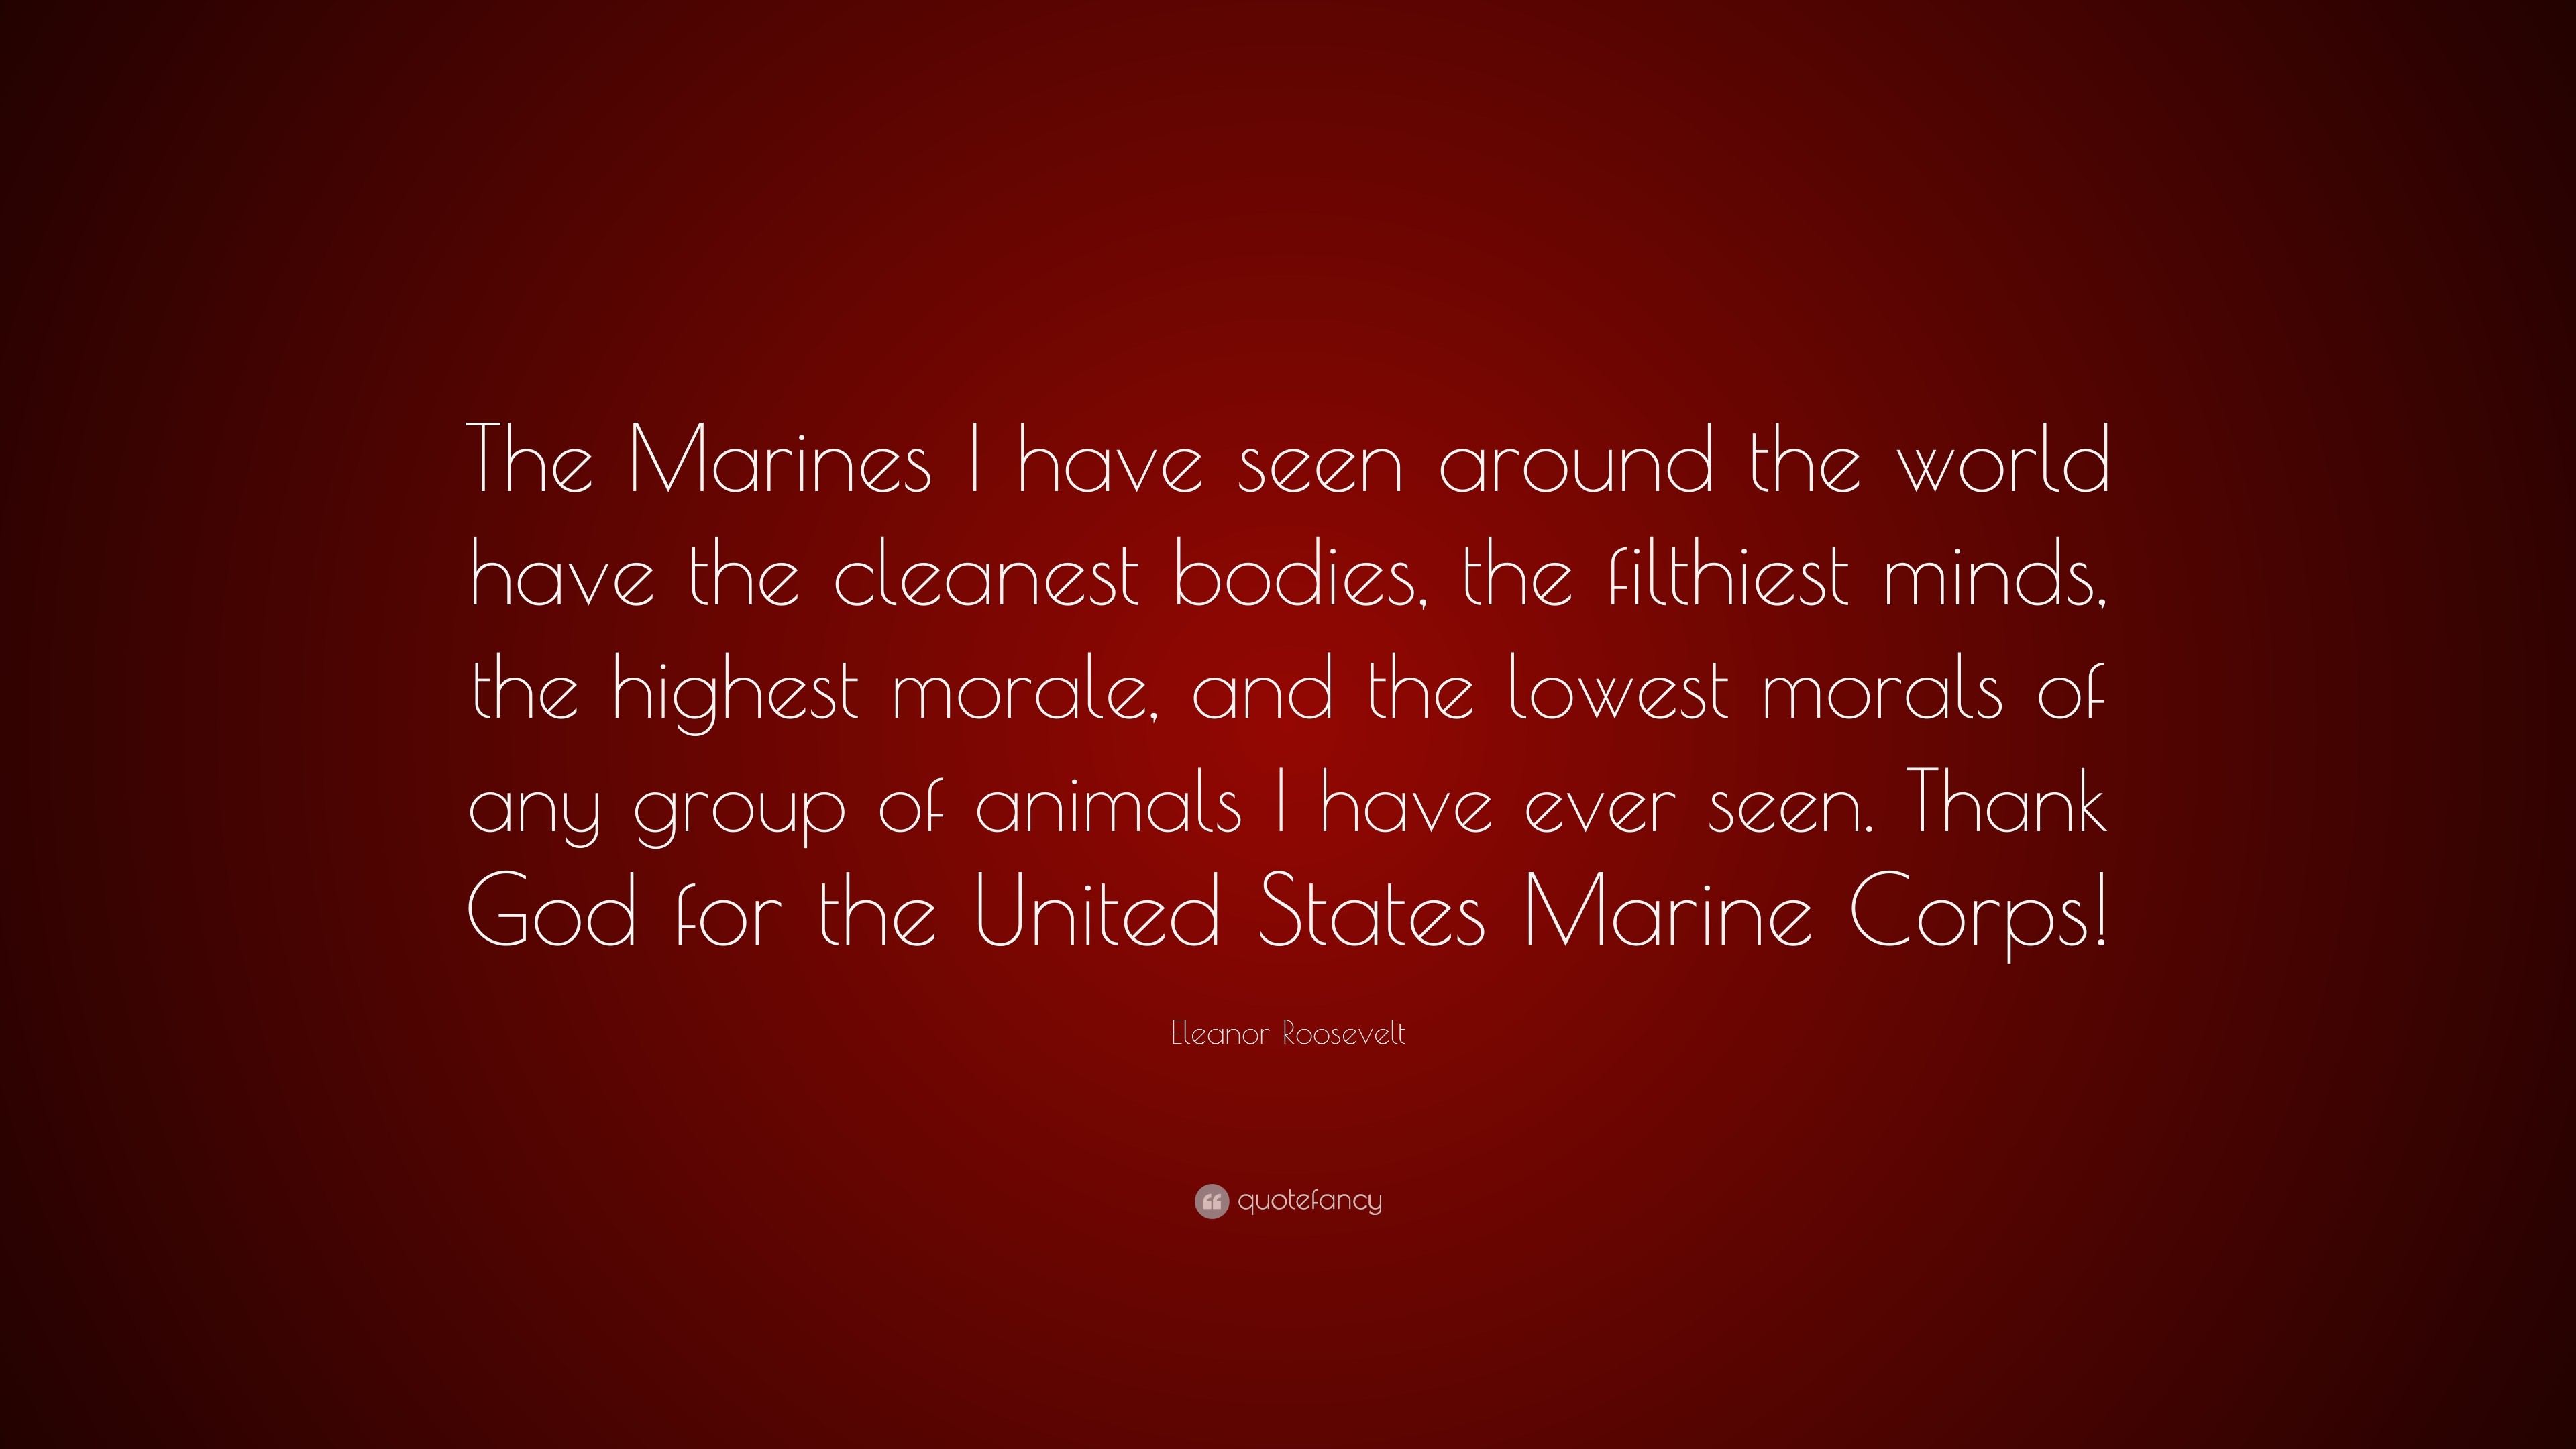 3840x2160 ... Eleanor Roosevelt Quote The Marines I have seen around the world